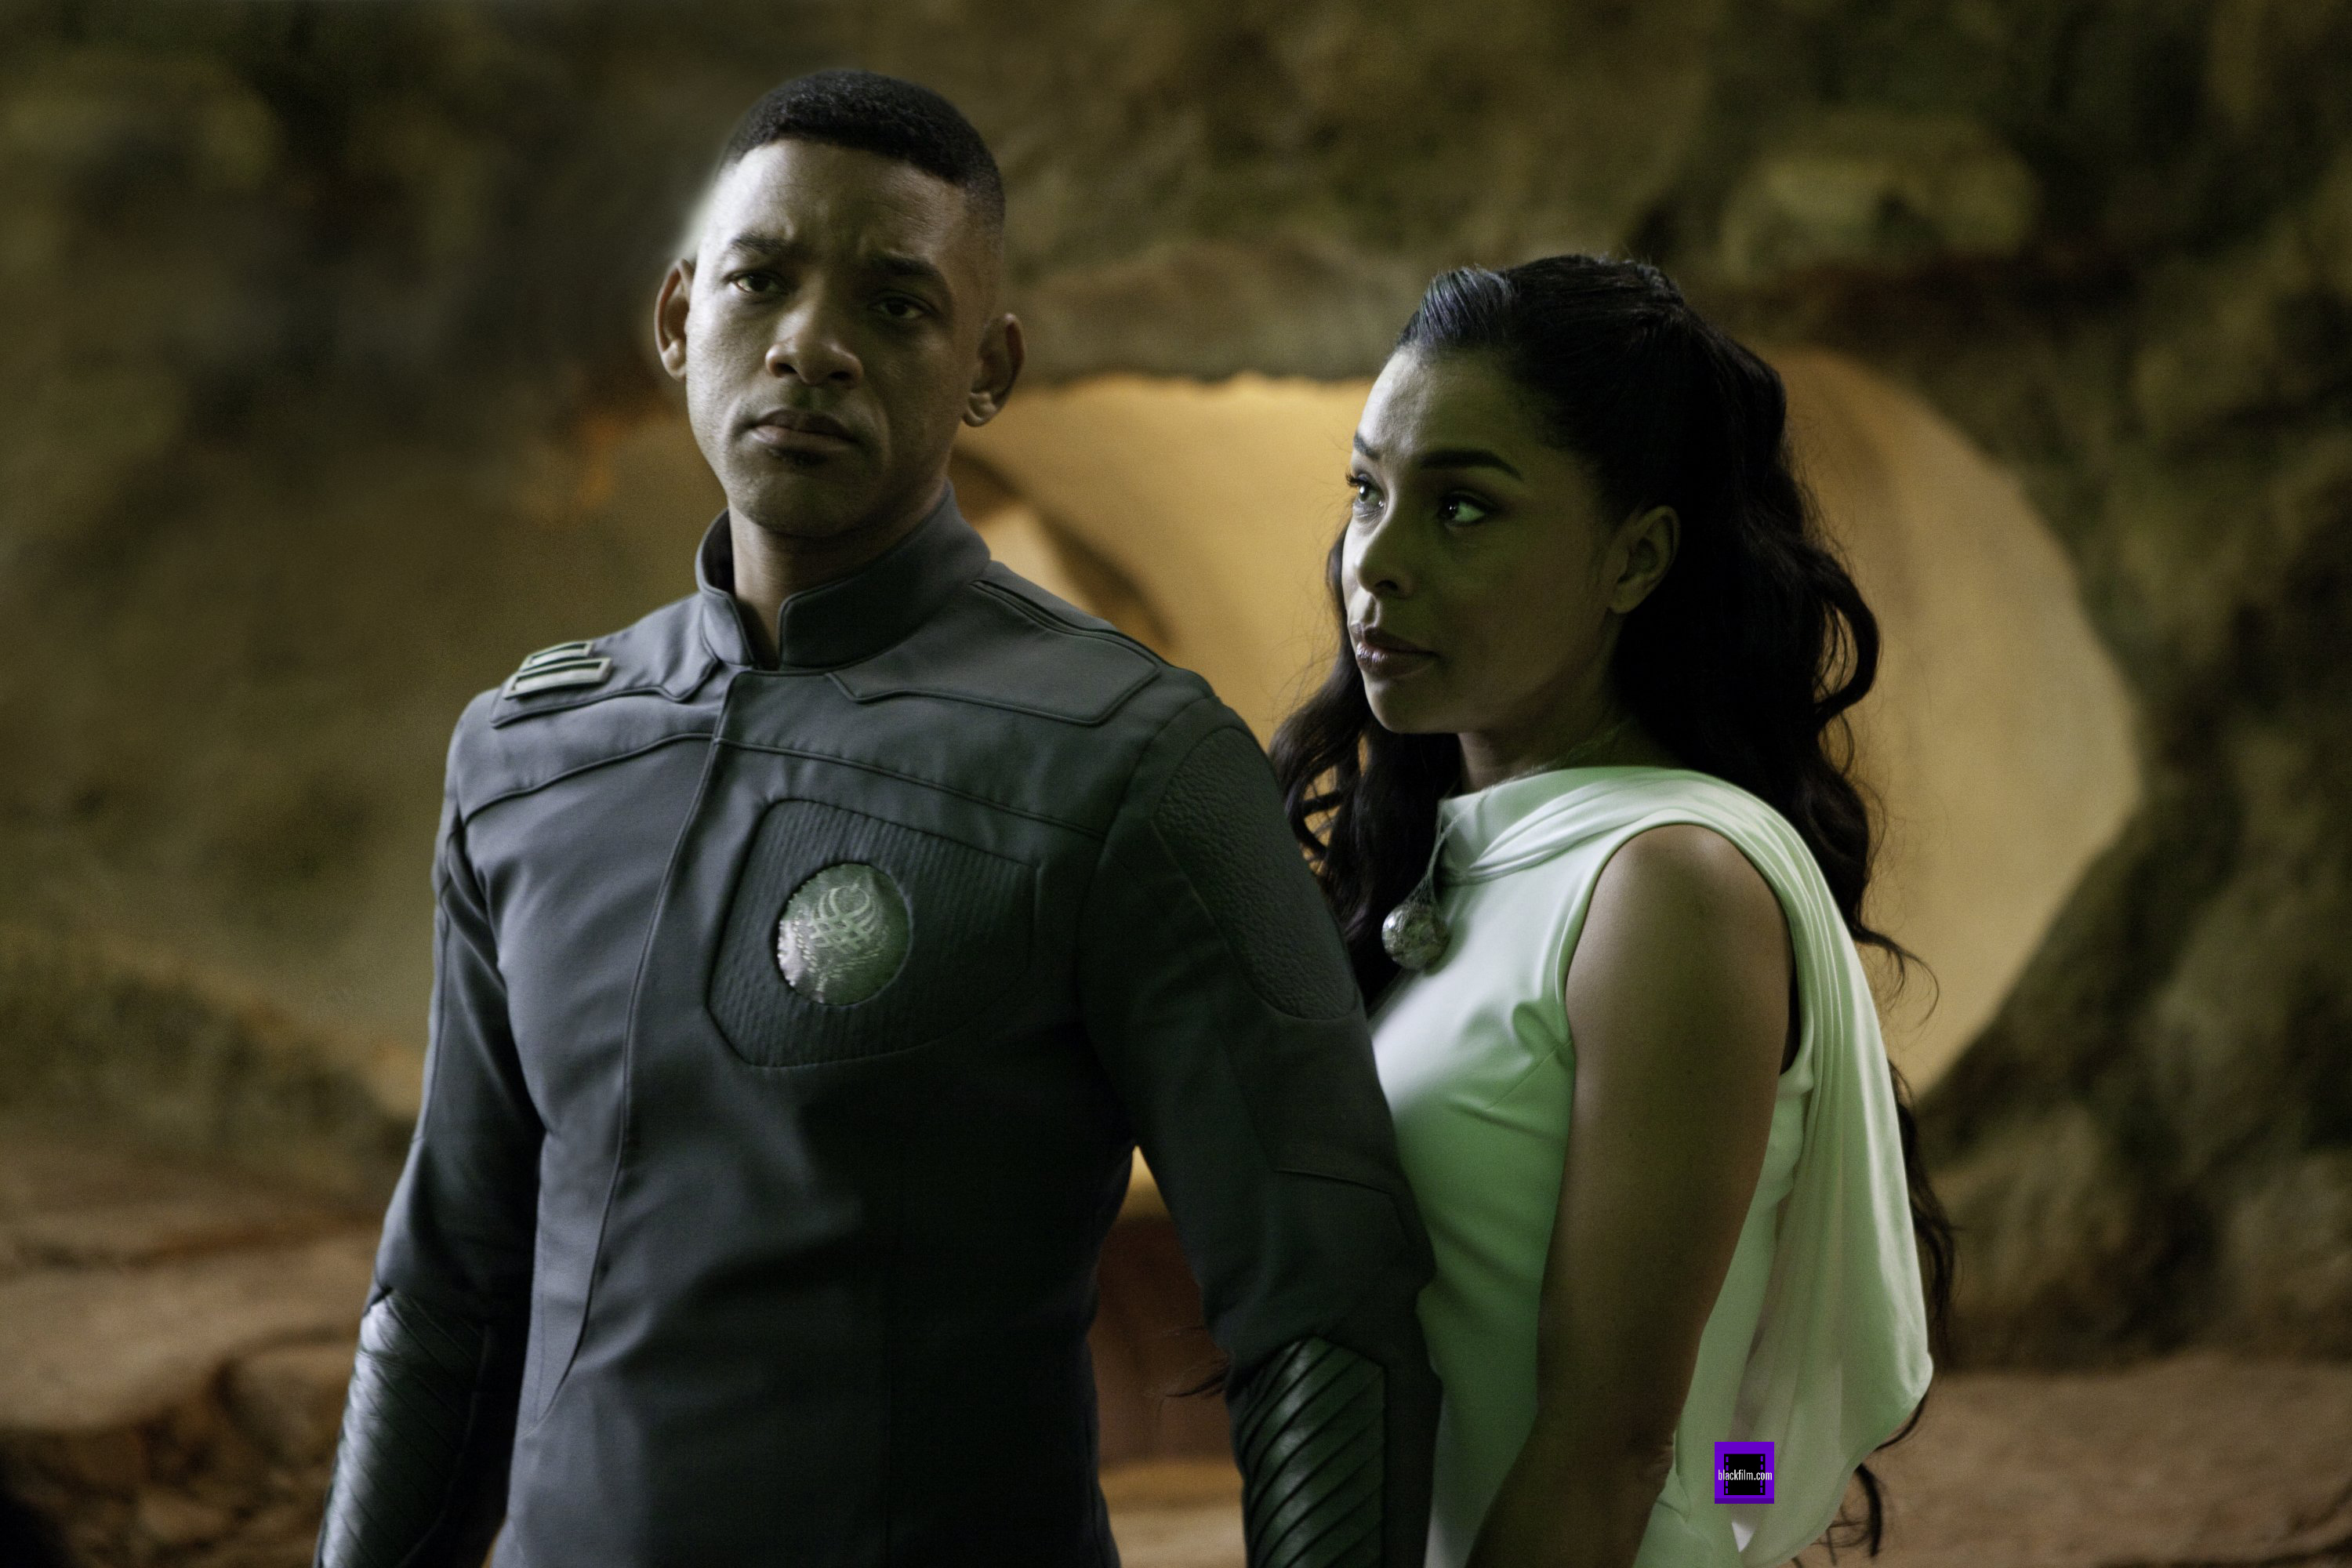 2880x1800px After Earth 1744.42 KB